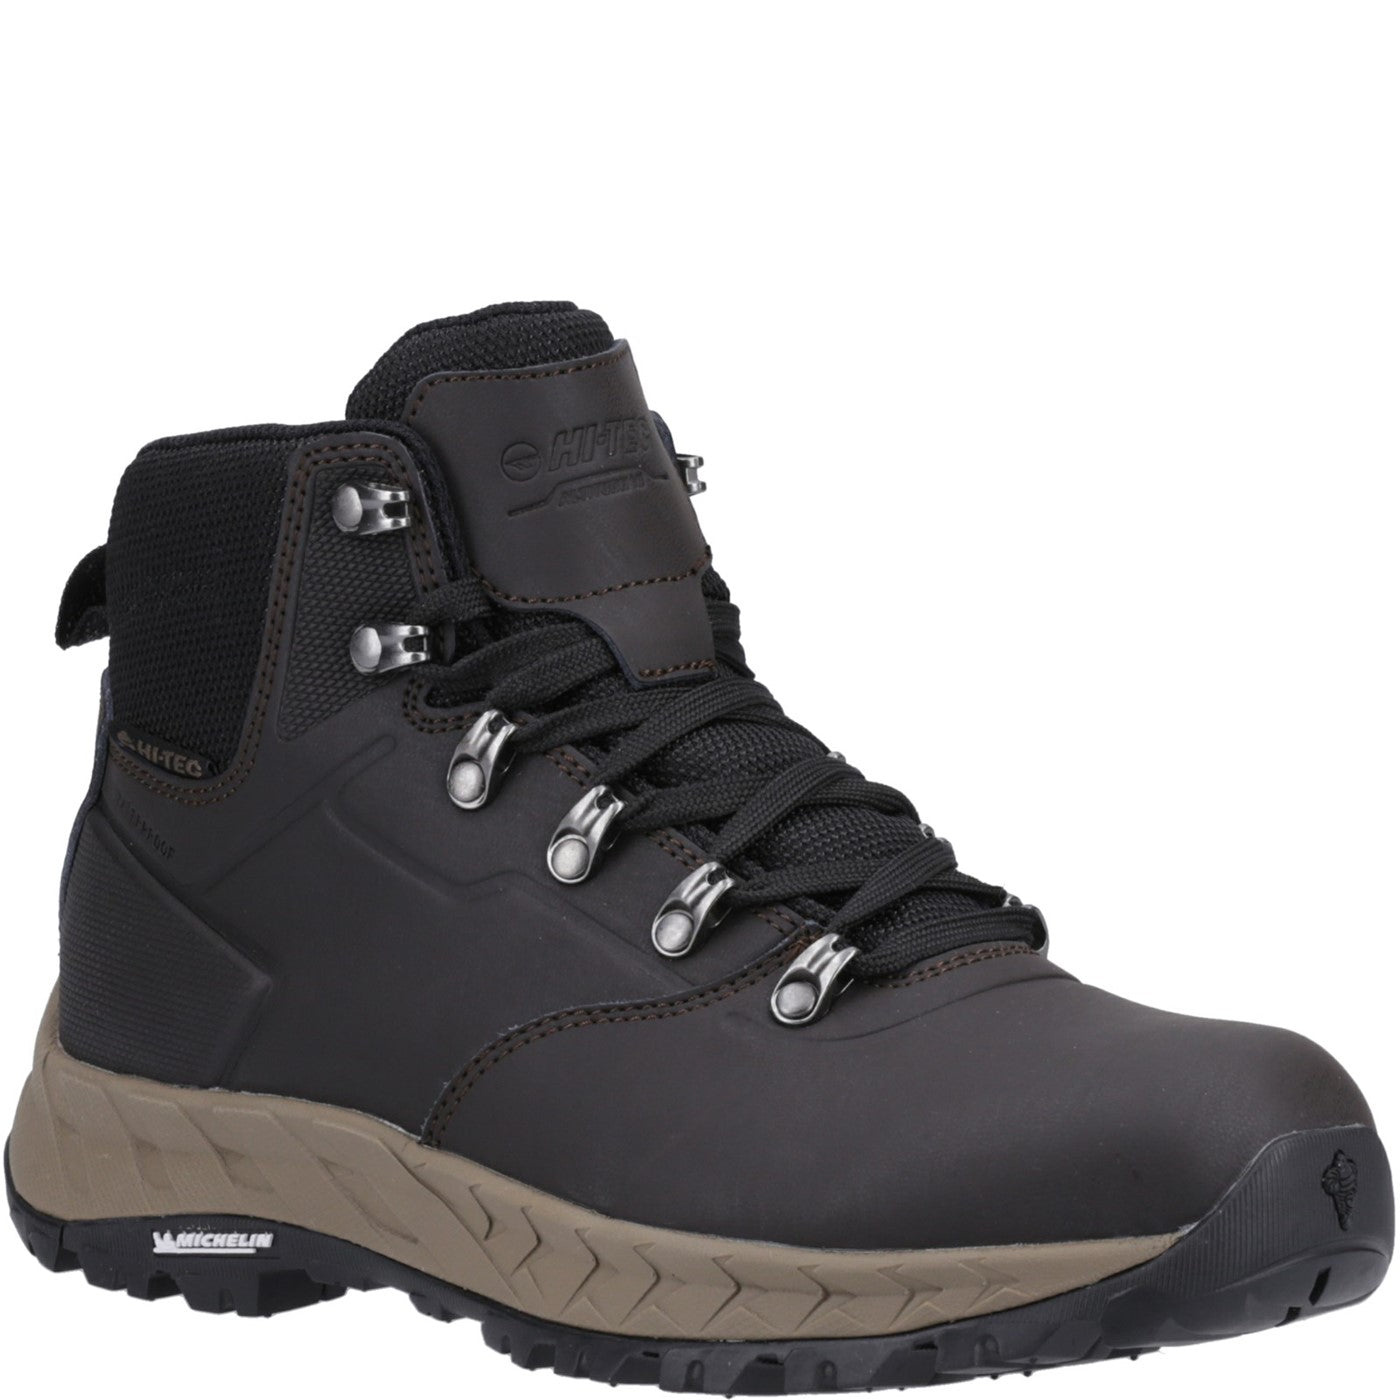 Mens Altitude VII WP Hiking Boots